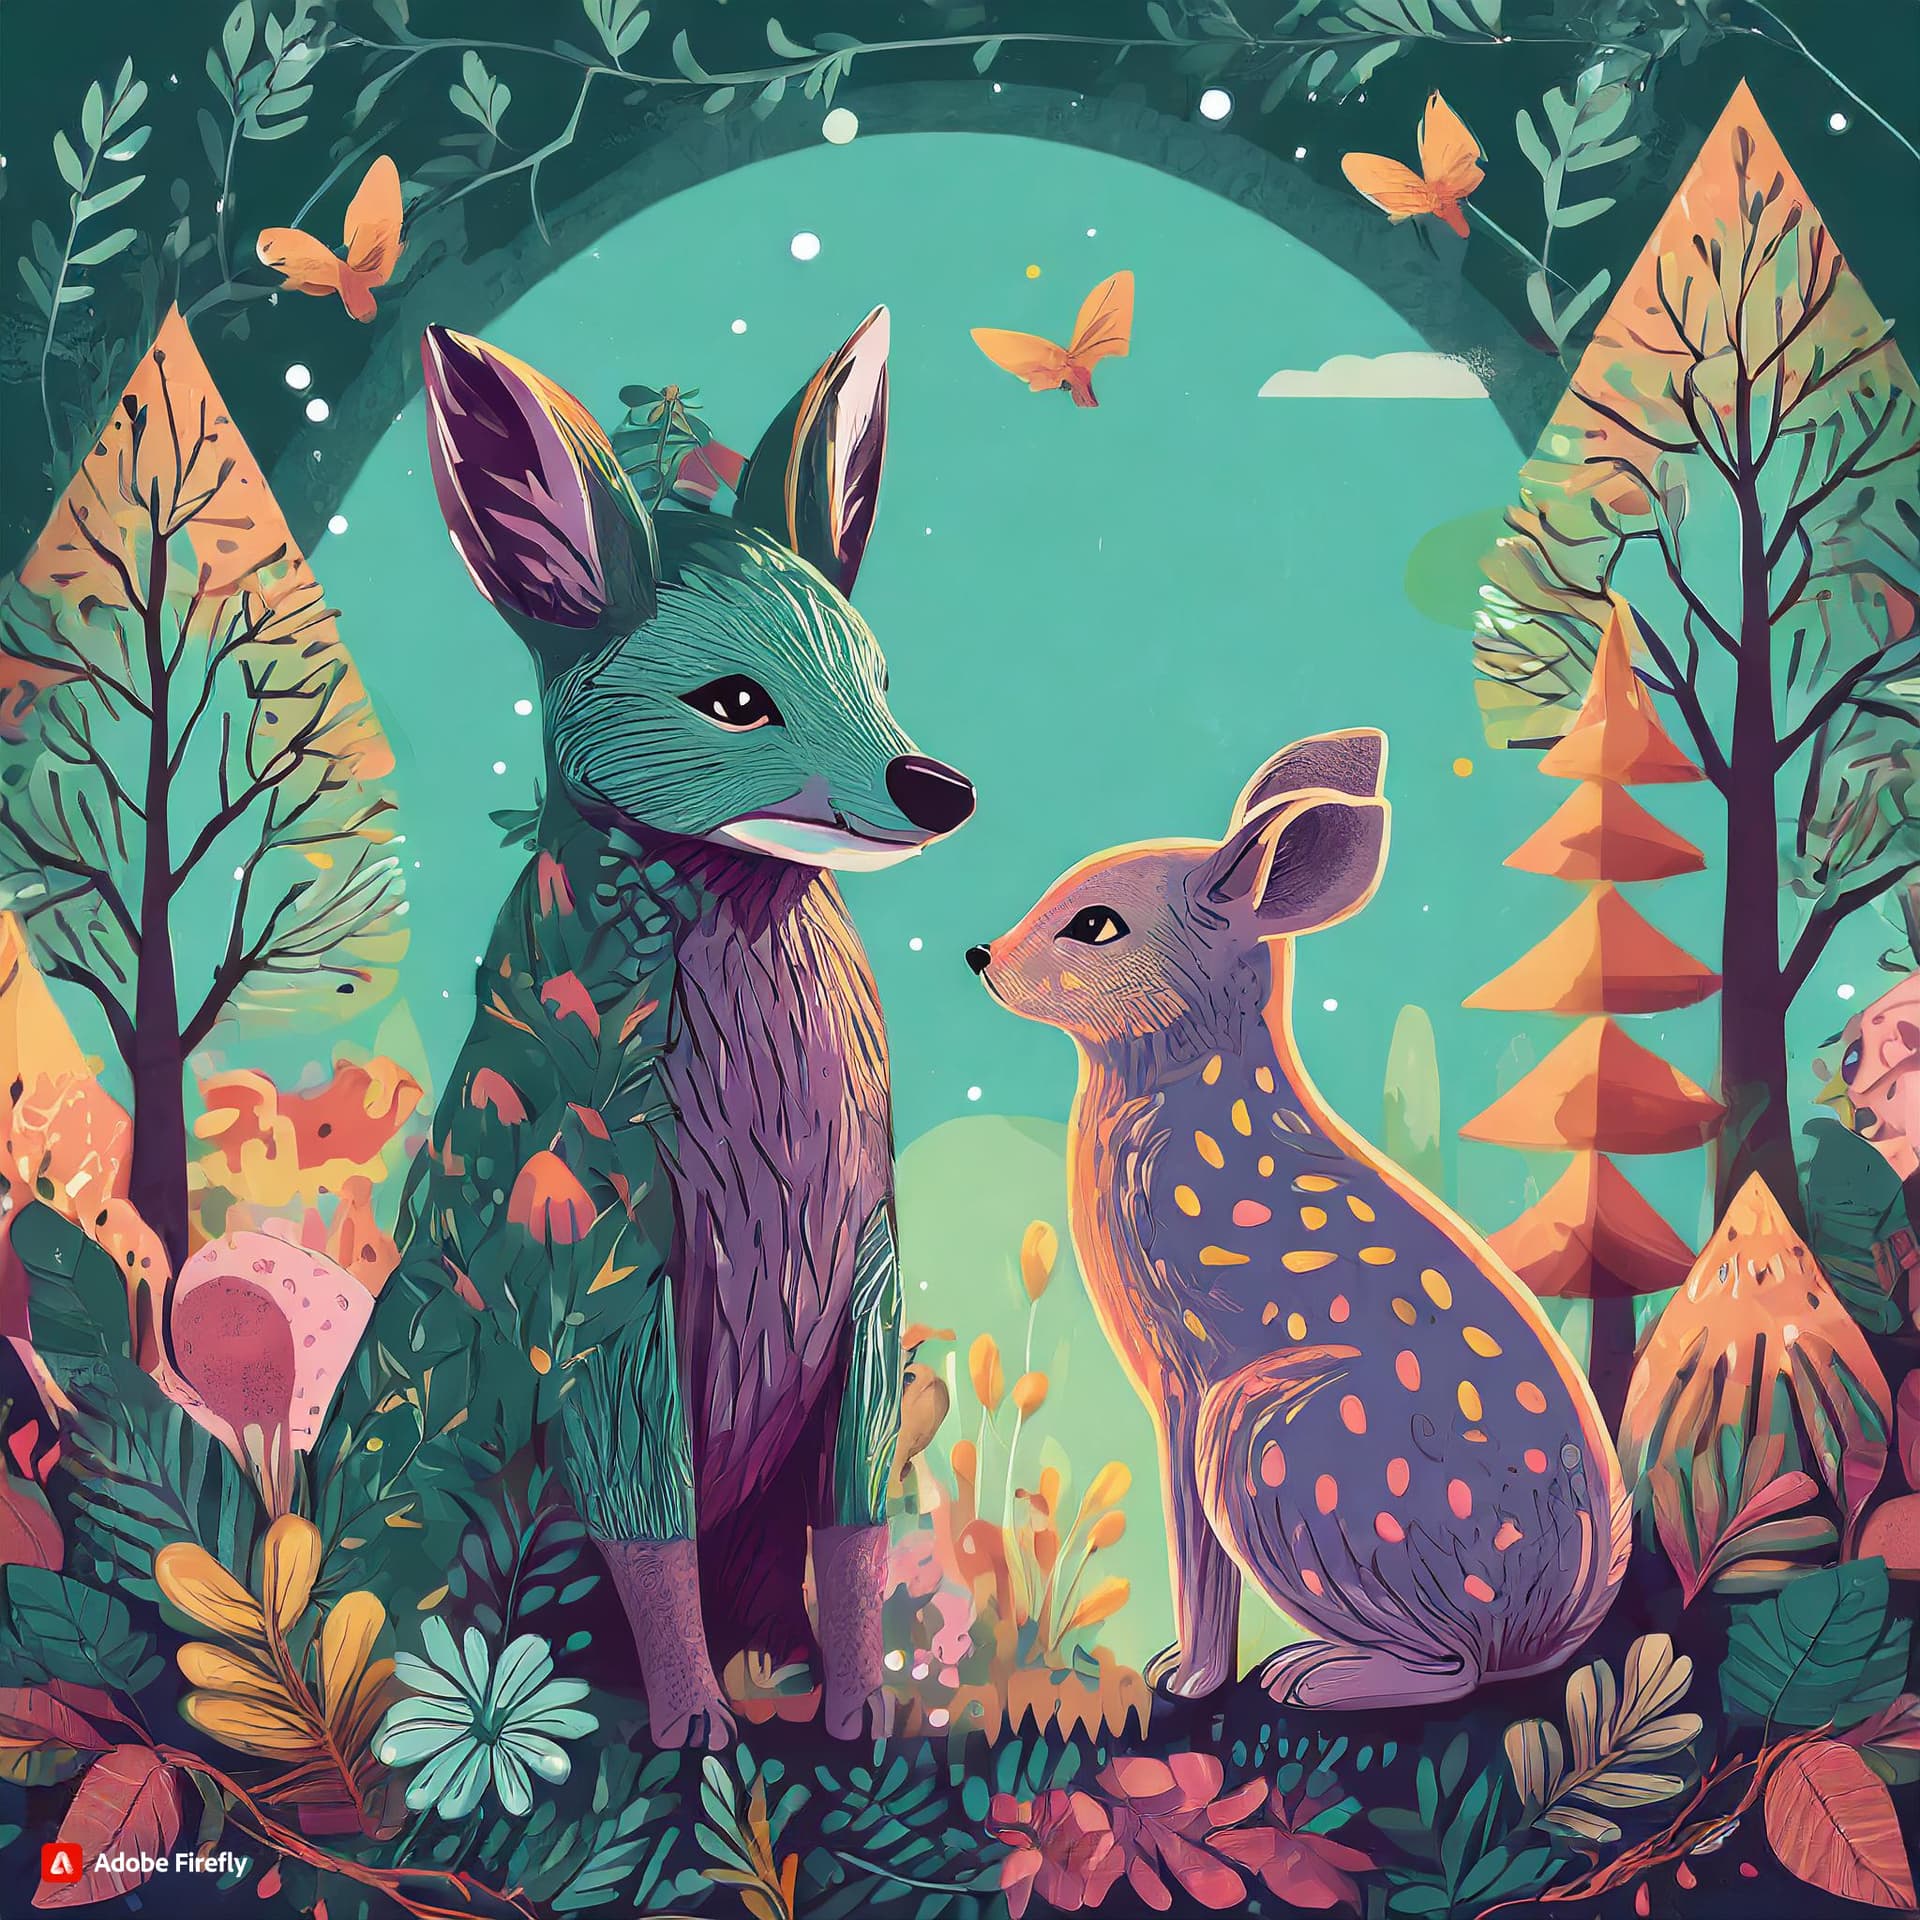 Firefly a profile picture that has an 80s vibe with cute woodland animals 76435